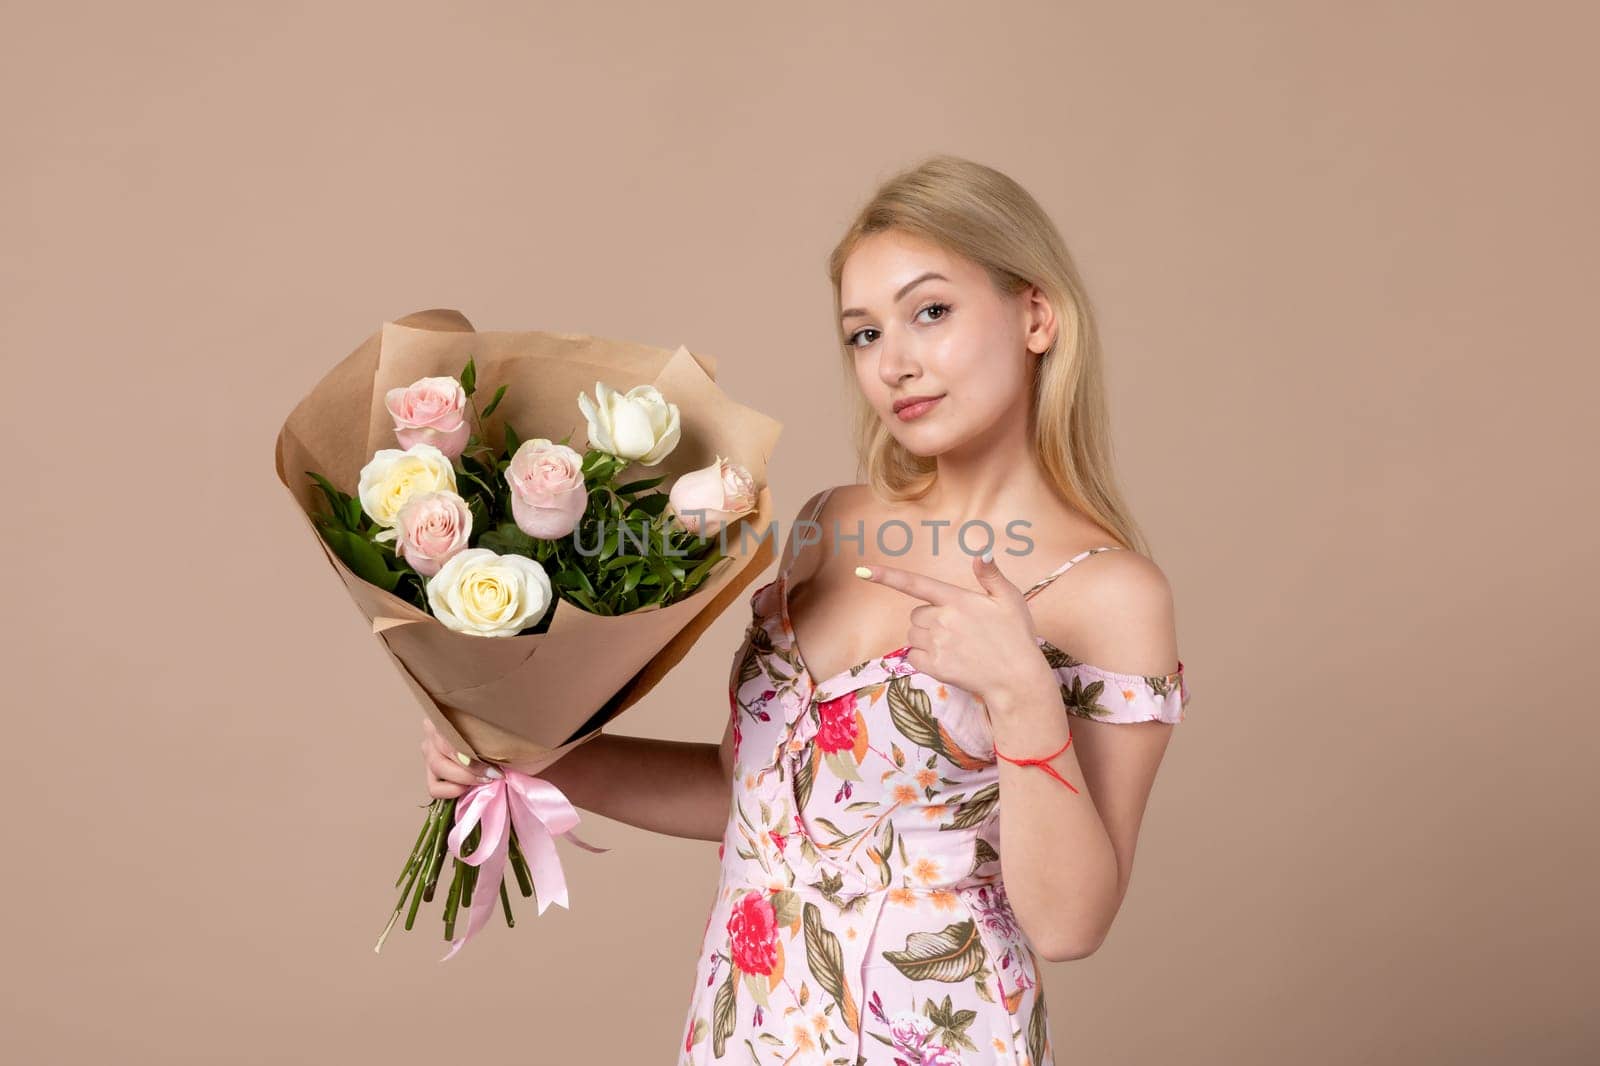 front view young female posing with bouquet of beautiful roses on brown background feminine sensual horizontal march gift equality woman by Kamran